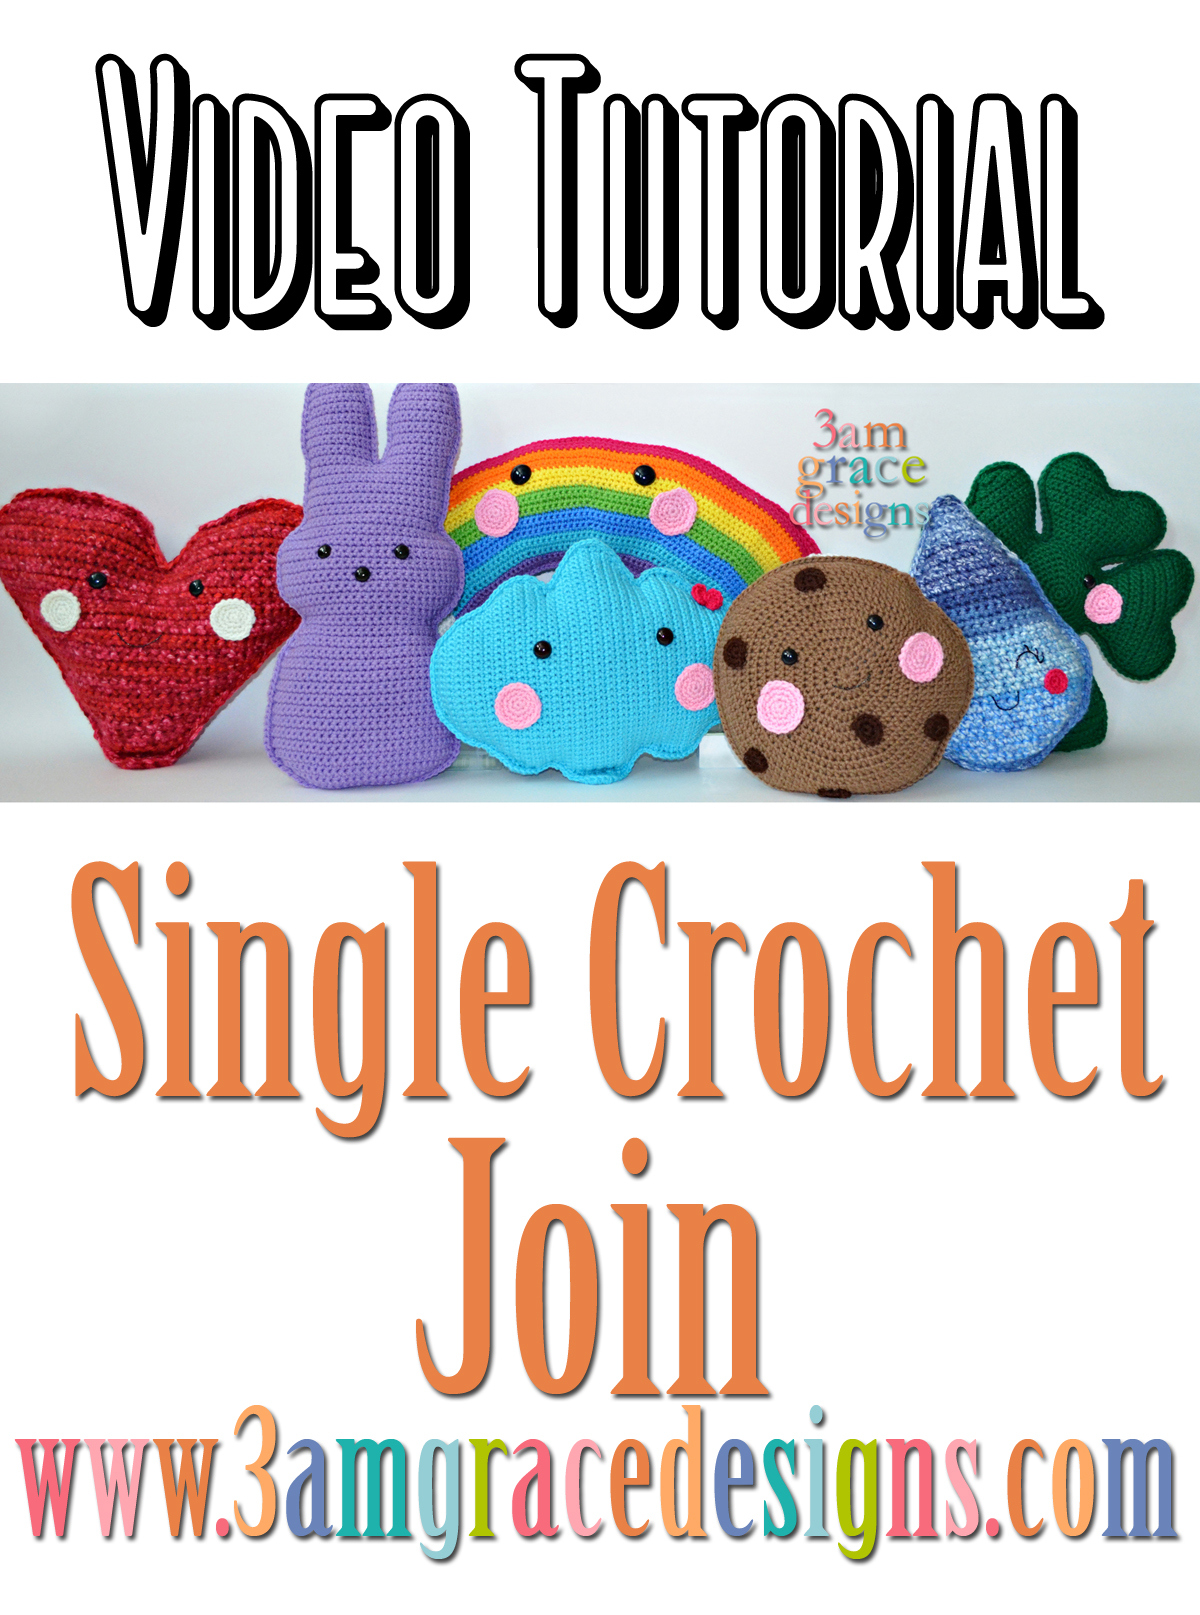 How To: Single Crochet Join